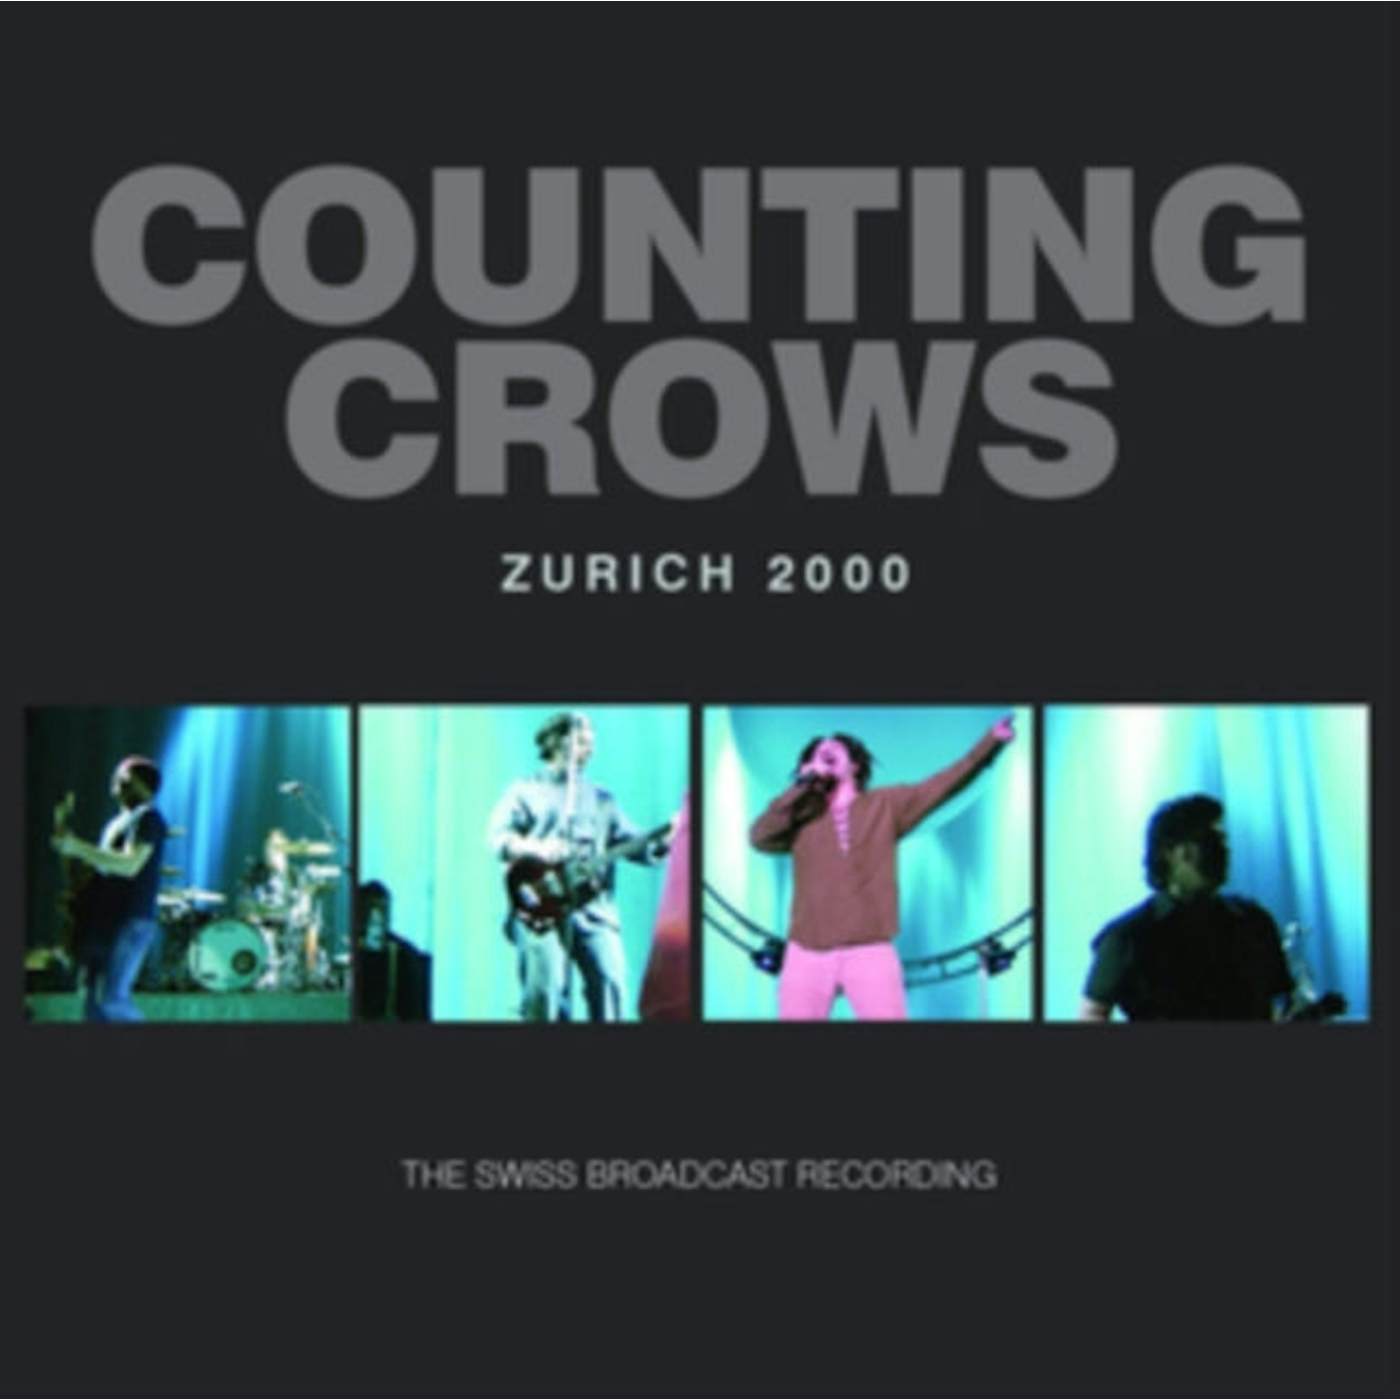 Counting Crows CD - Zurich 2000